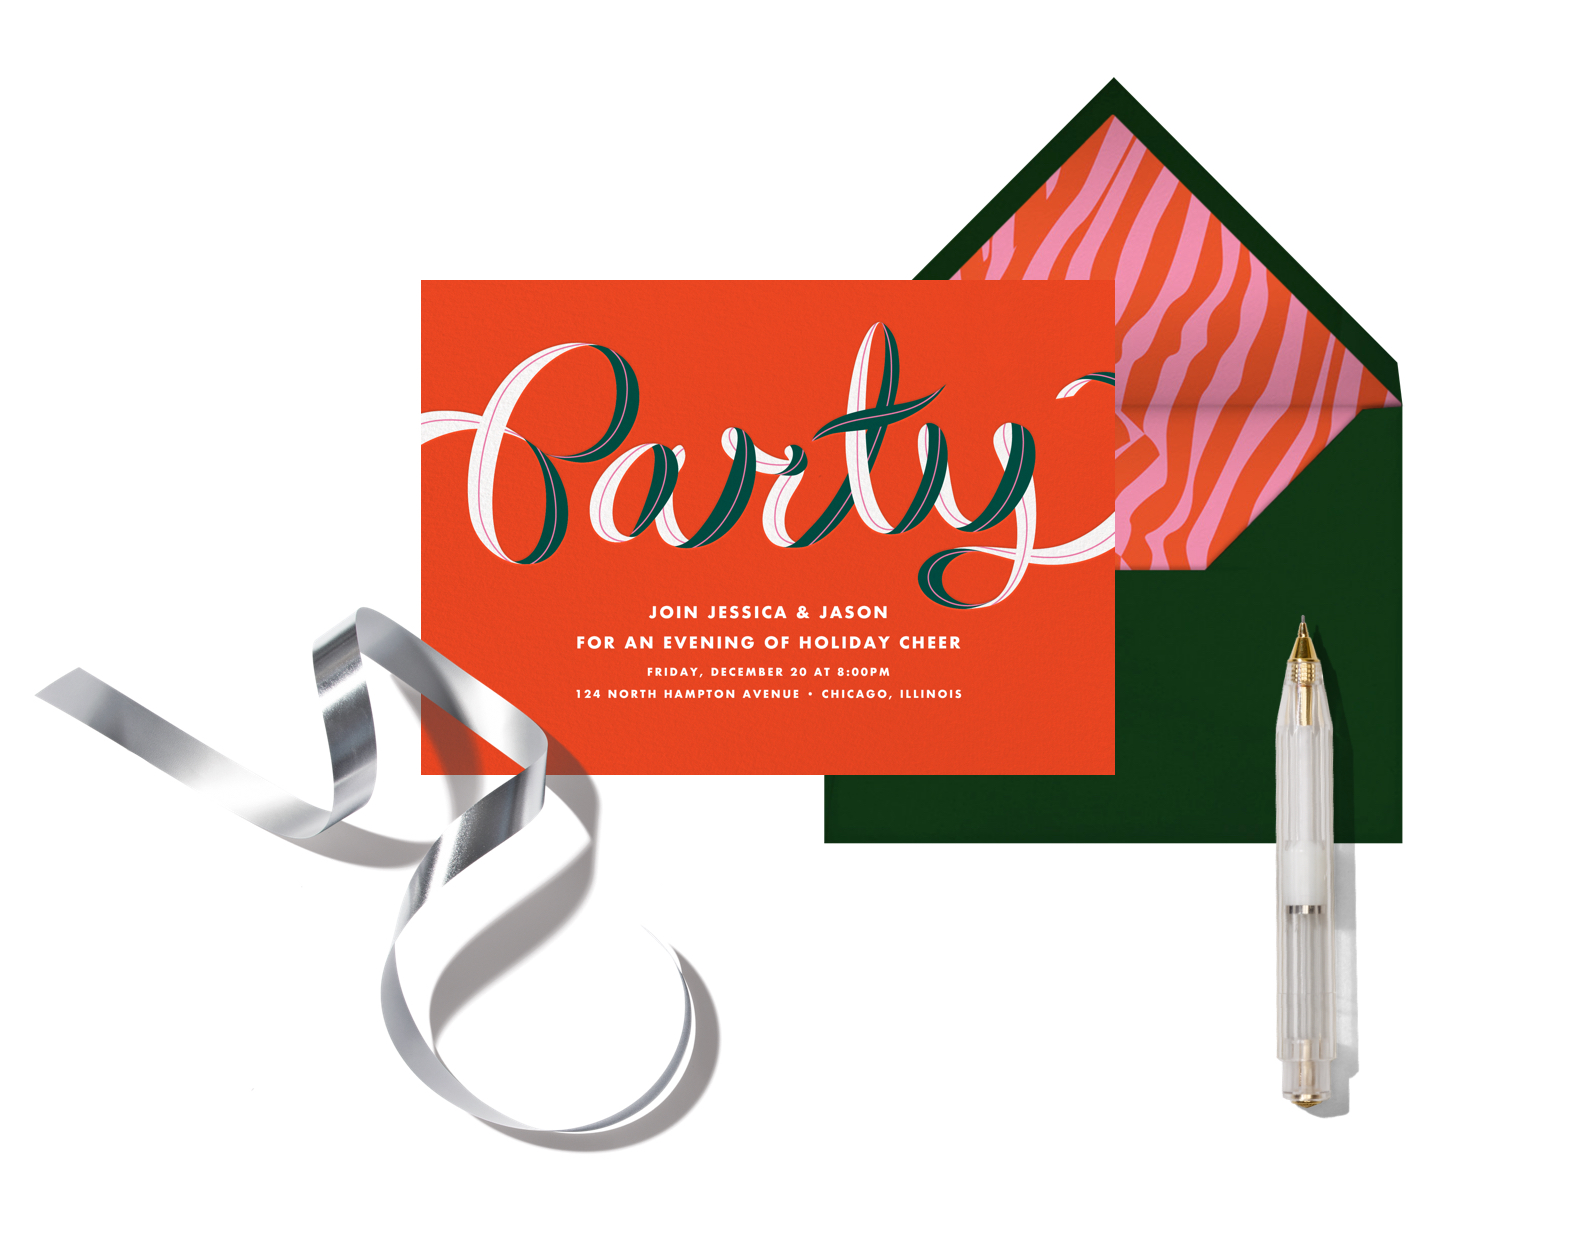 Holiday party hosting tips from Cheree Berry